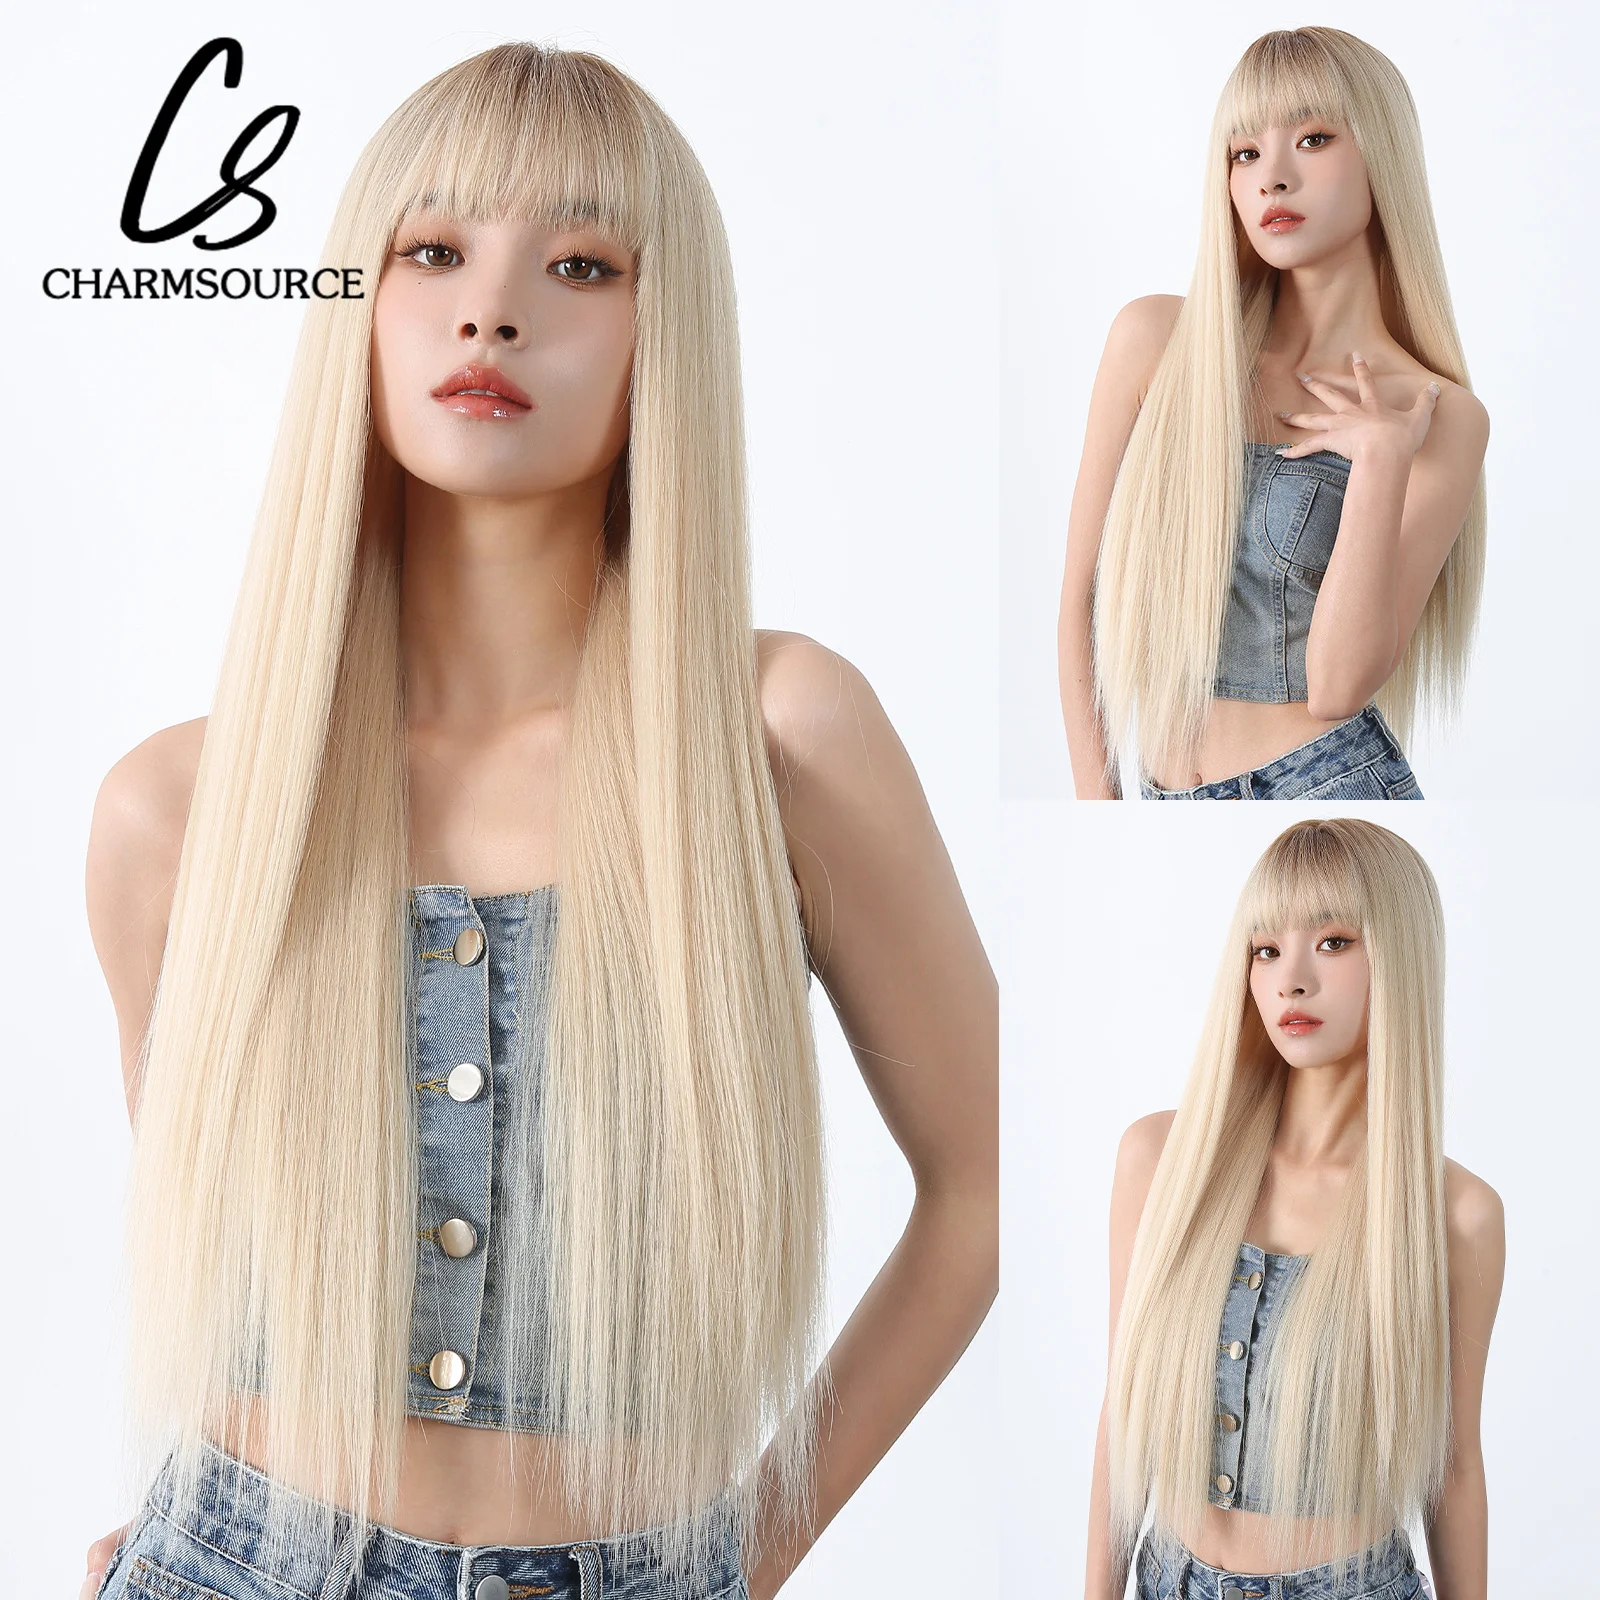 

Emmor White Platinum Blond Wigs for Woman Long Straight Wavy Wig with Bangs Daily Party Heat Resistant Fiber Synthetic Hair